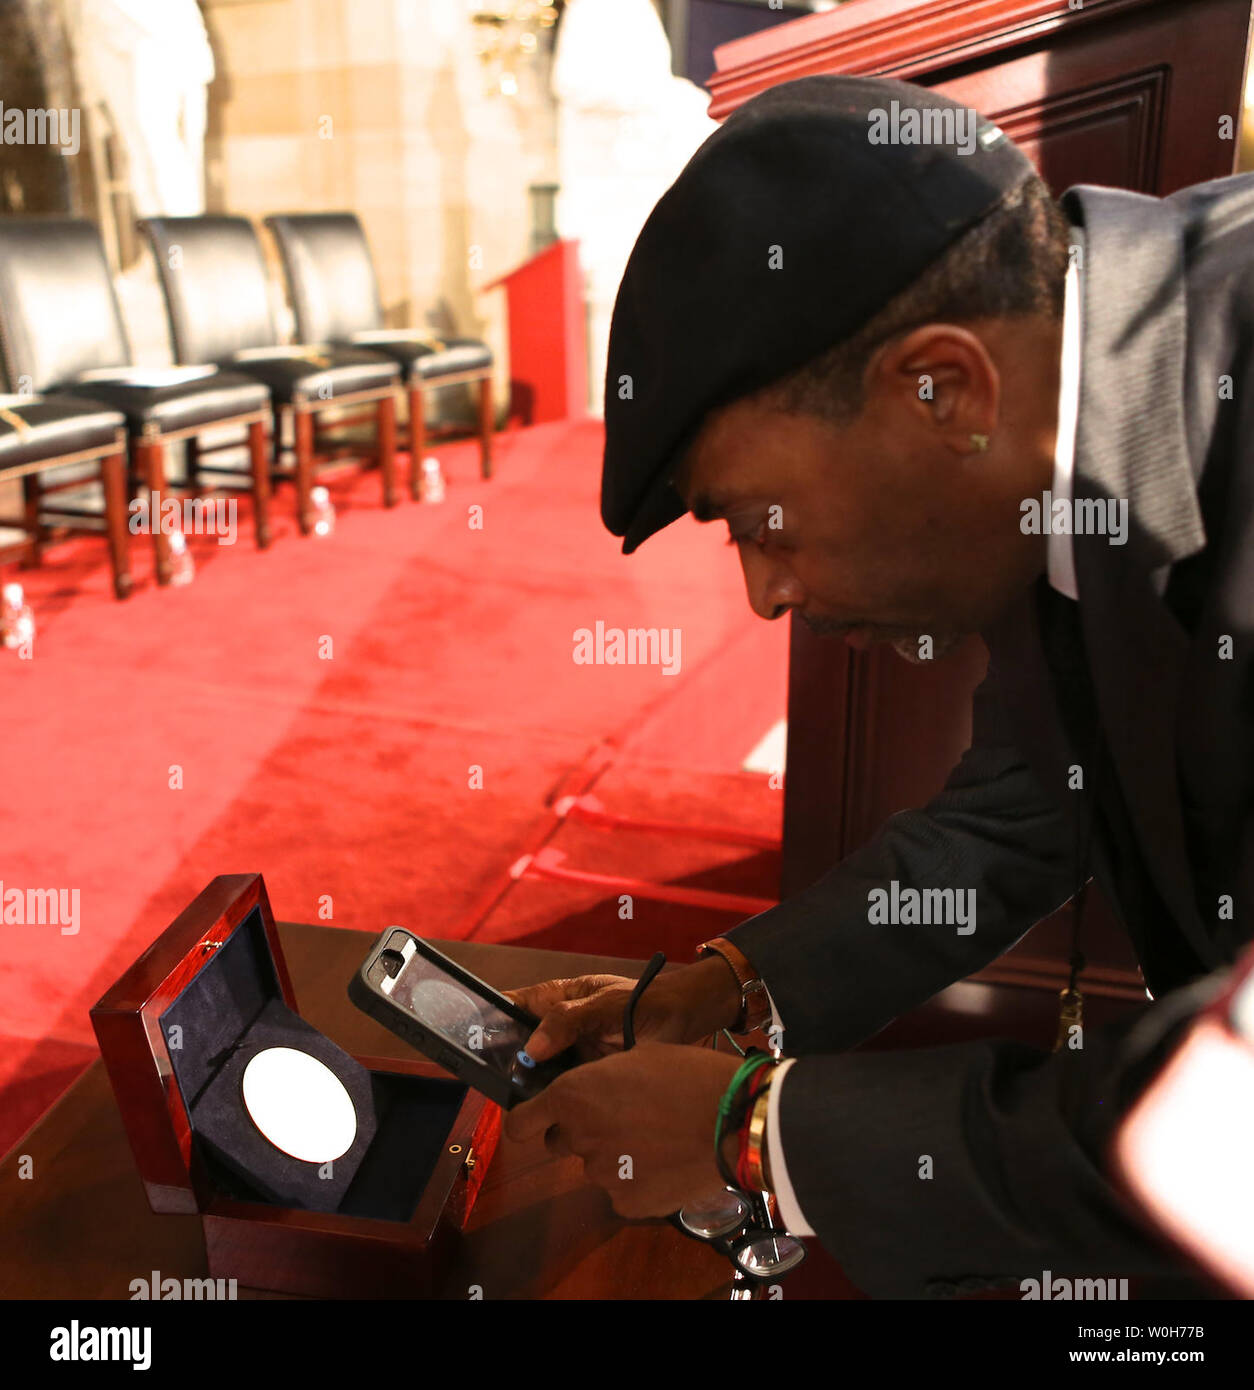 Film maker Spike Lee takes a photo of the Congressional Gold Medal  before a Congressional Gold Medal ceremony which was posthumously presented to victims of the 1963 Birmingham bombing, at the U.S. Capitol, in Washington on September 10, 2013.  The medal is awarded in recognition of victims Addie Mae Collins, Denise McNair, Carole Robertson and Cynthia Wesley, and how their sacrifice served as a catalyst for the Civil Rights Movement.  UPI/Molly Riley Stock Photo